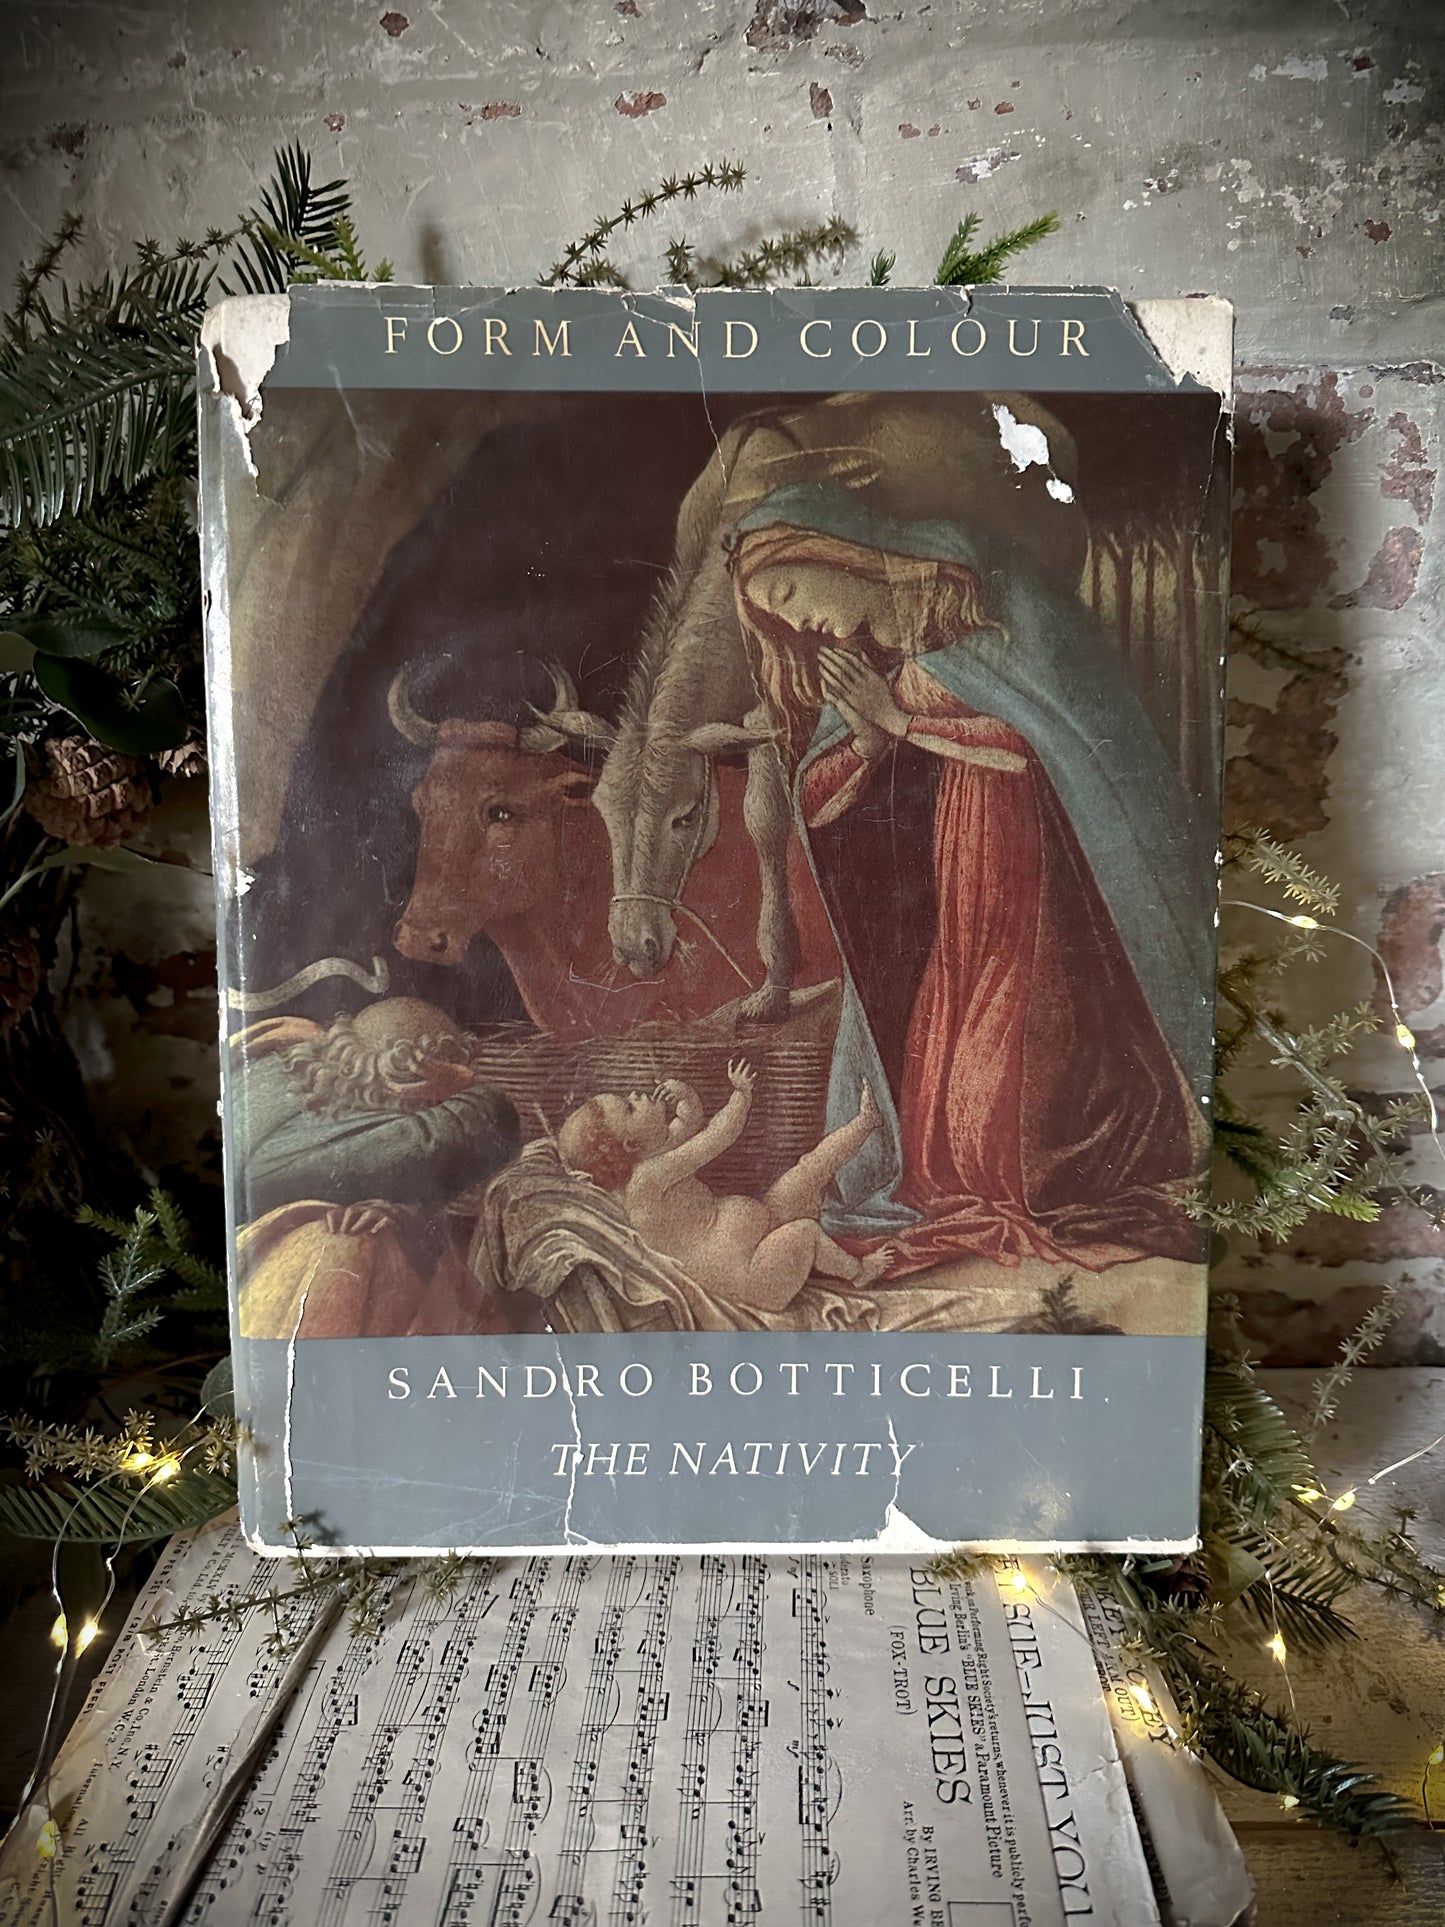 Sandro Boticelli The Nativity Form and Colour. Long and, Green and Co. London, 1949.